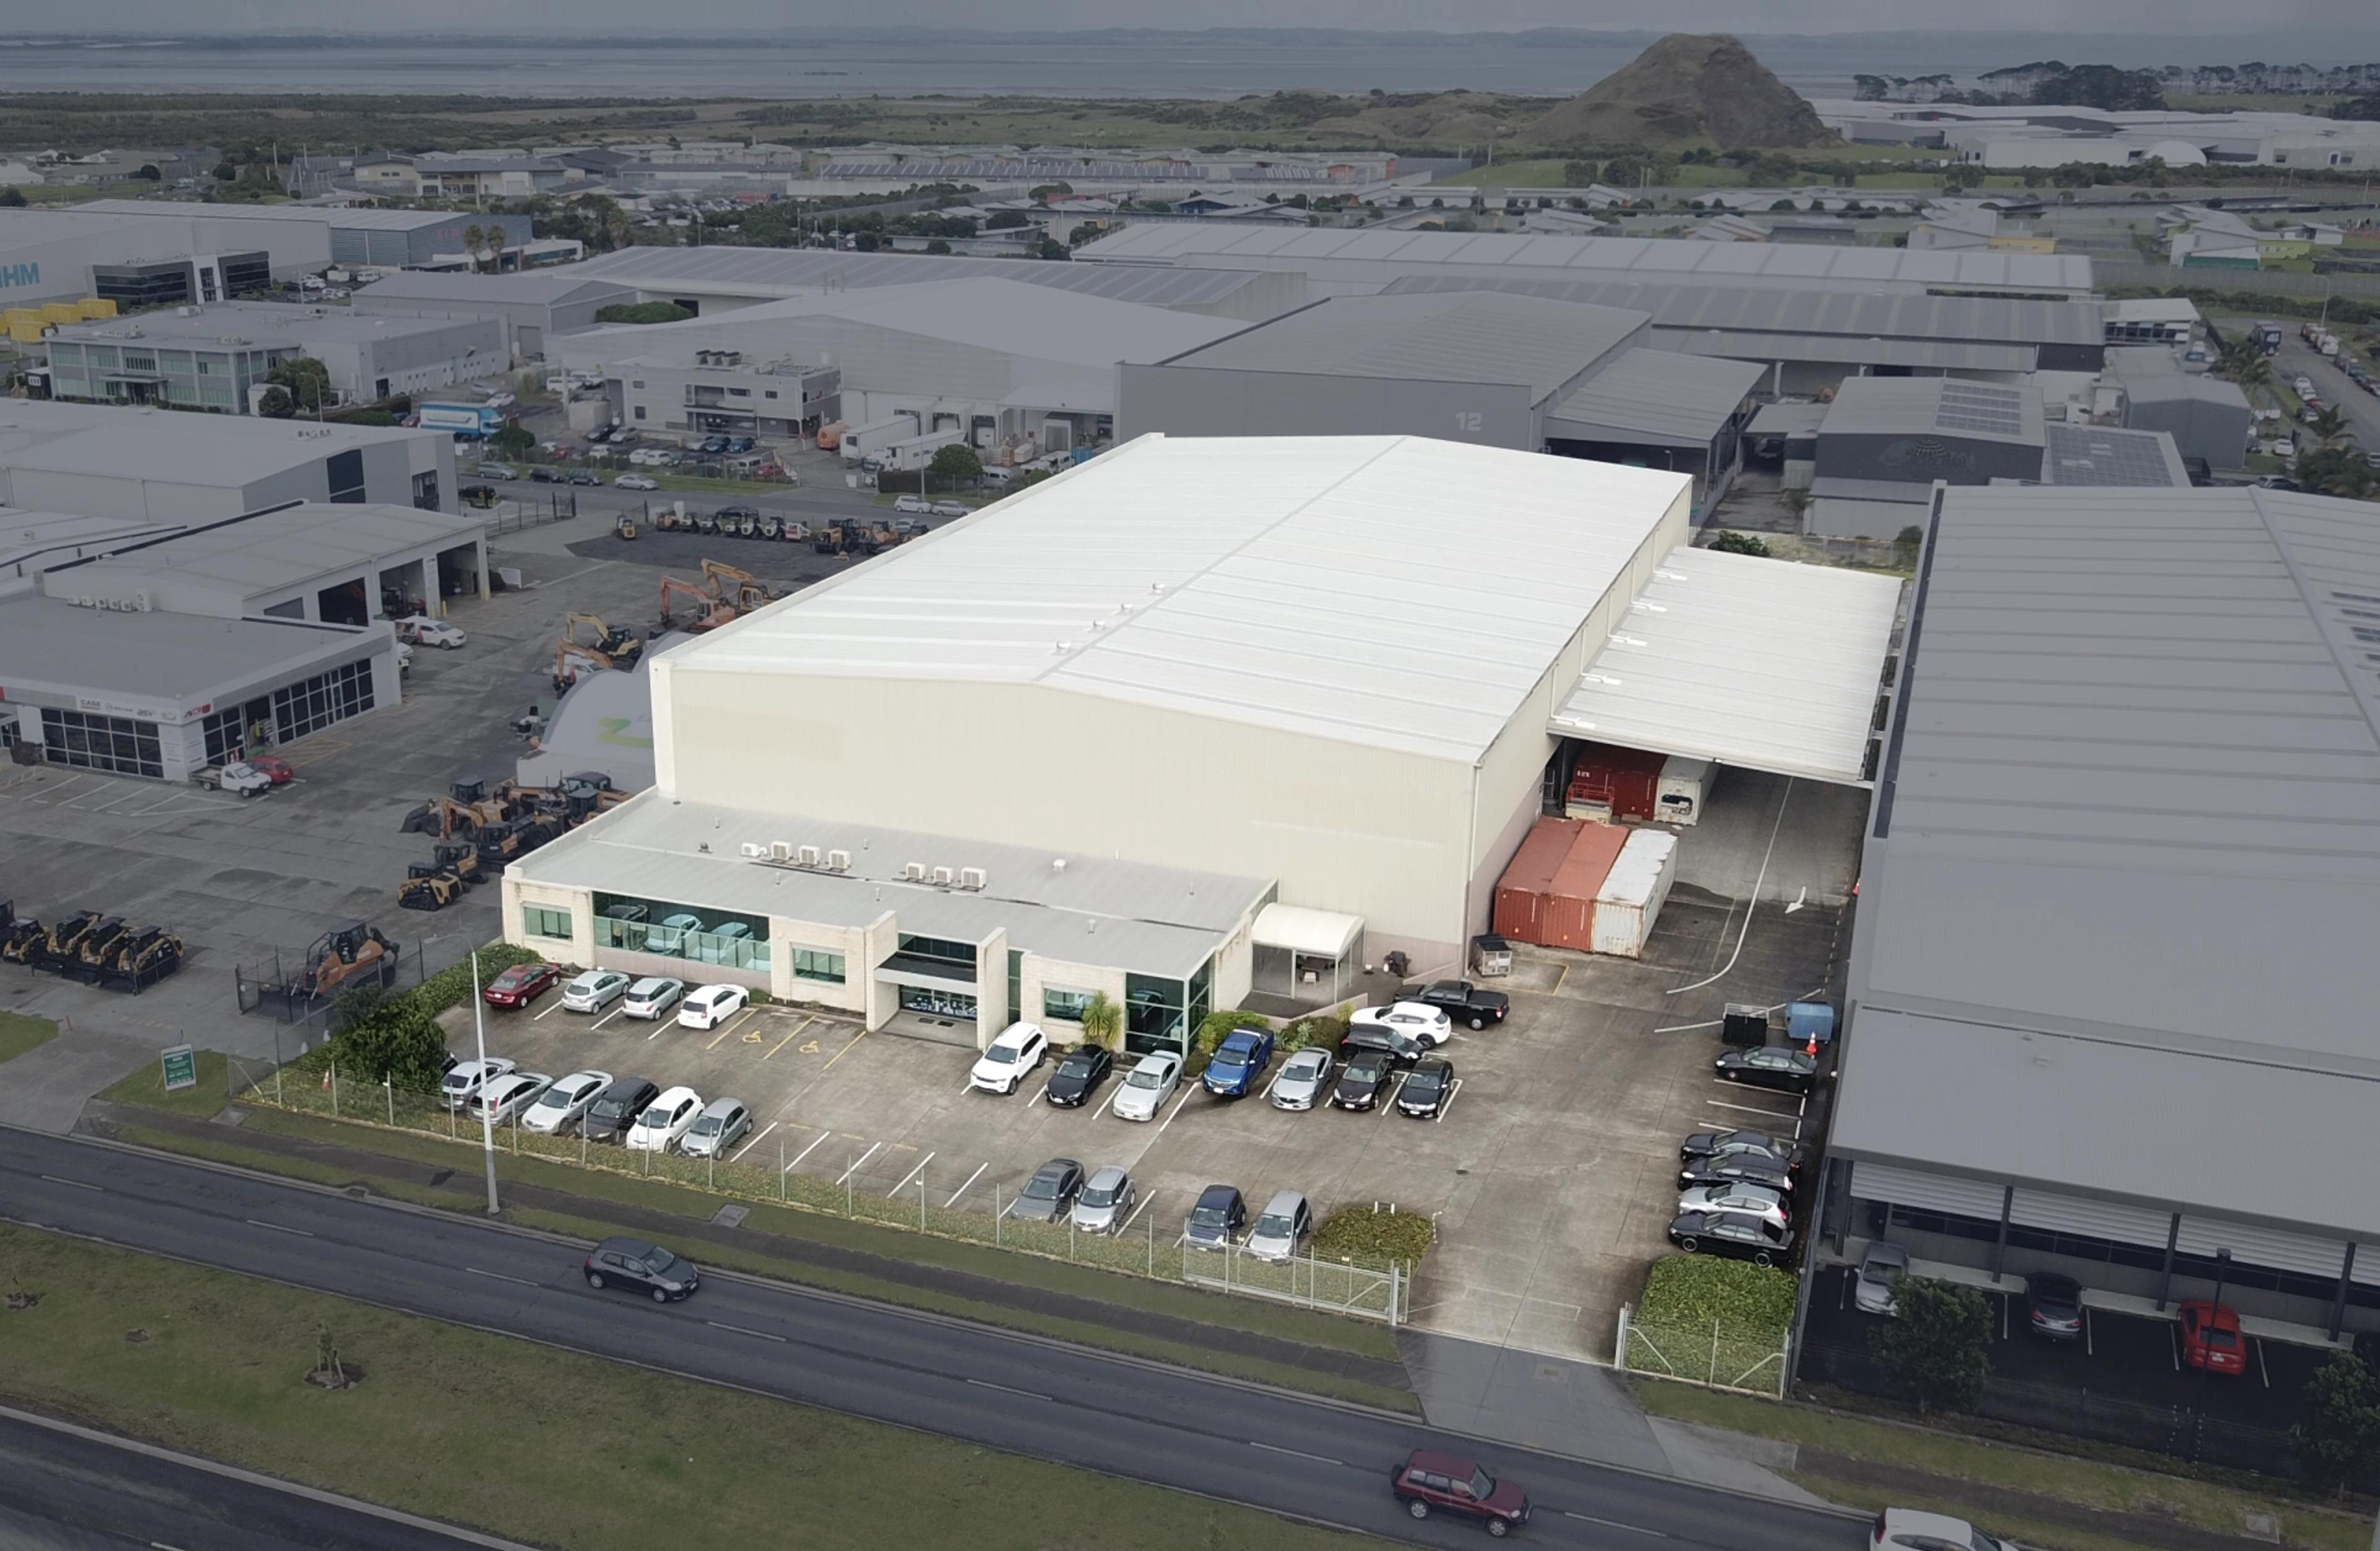 Jasper acquires A-grade industrial facility in South Auckland for just under $14m